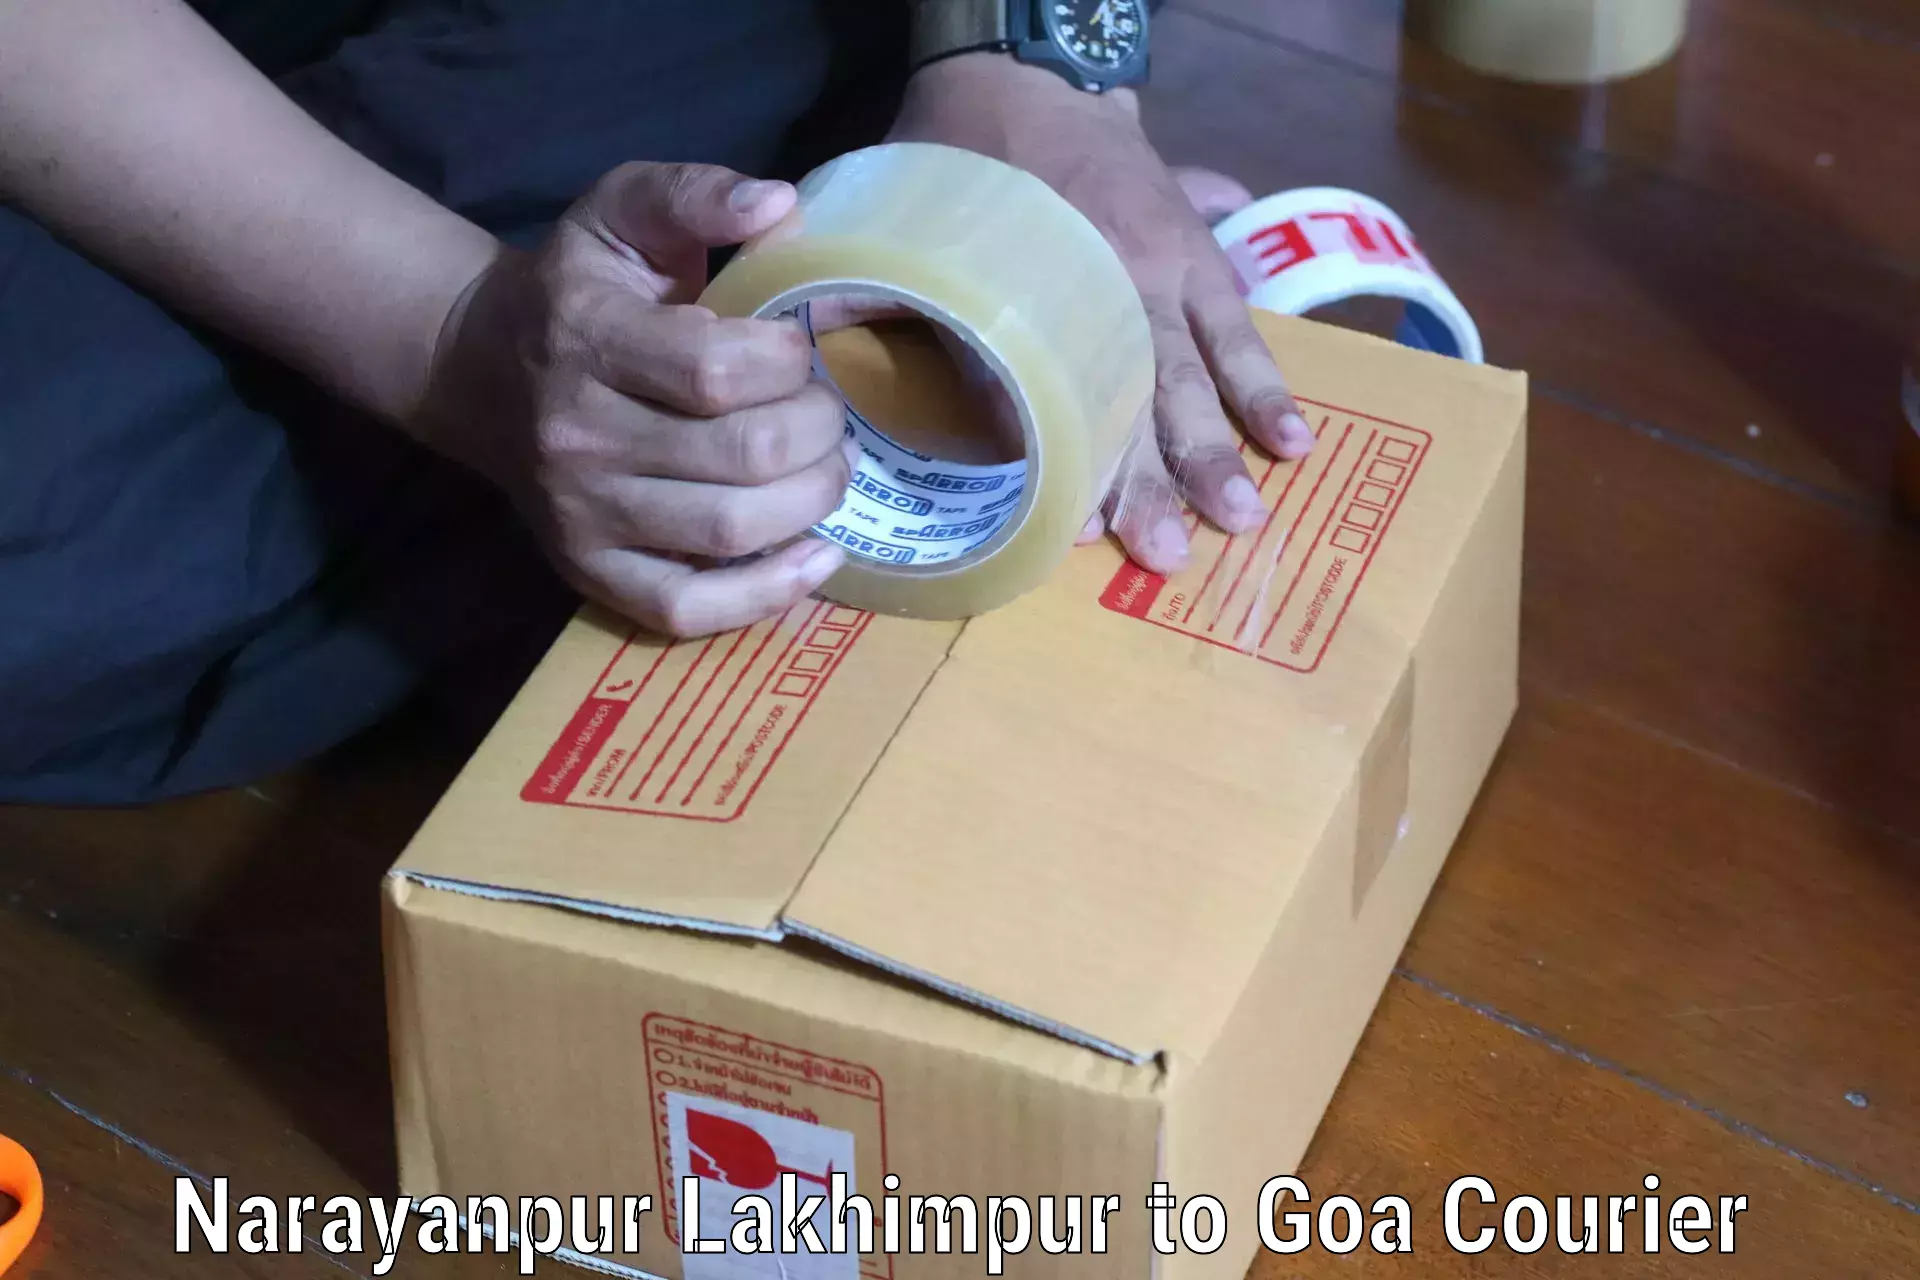 Professional courier services Narayanpur Lakhimpur to IIT Goa